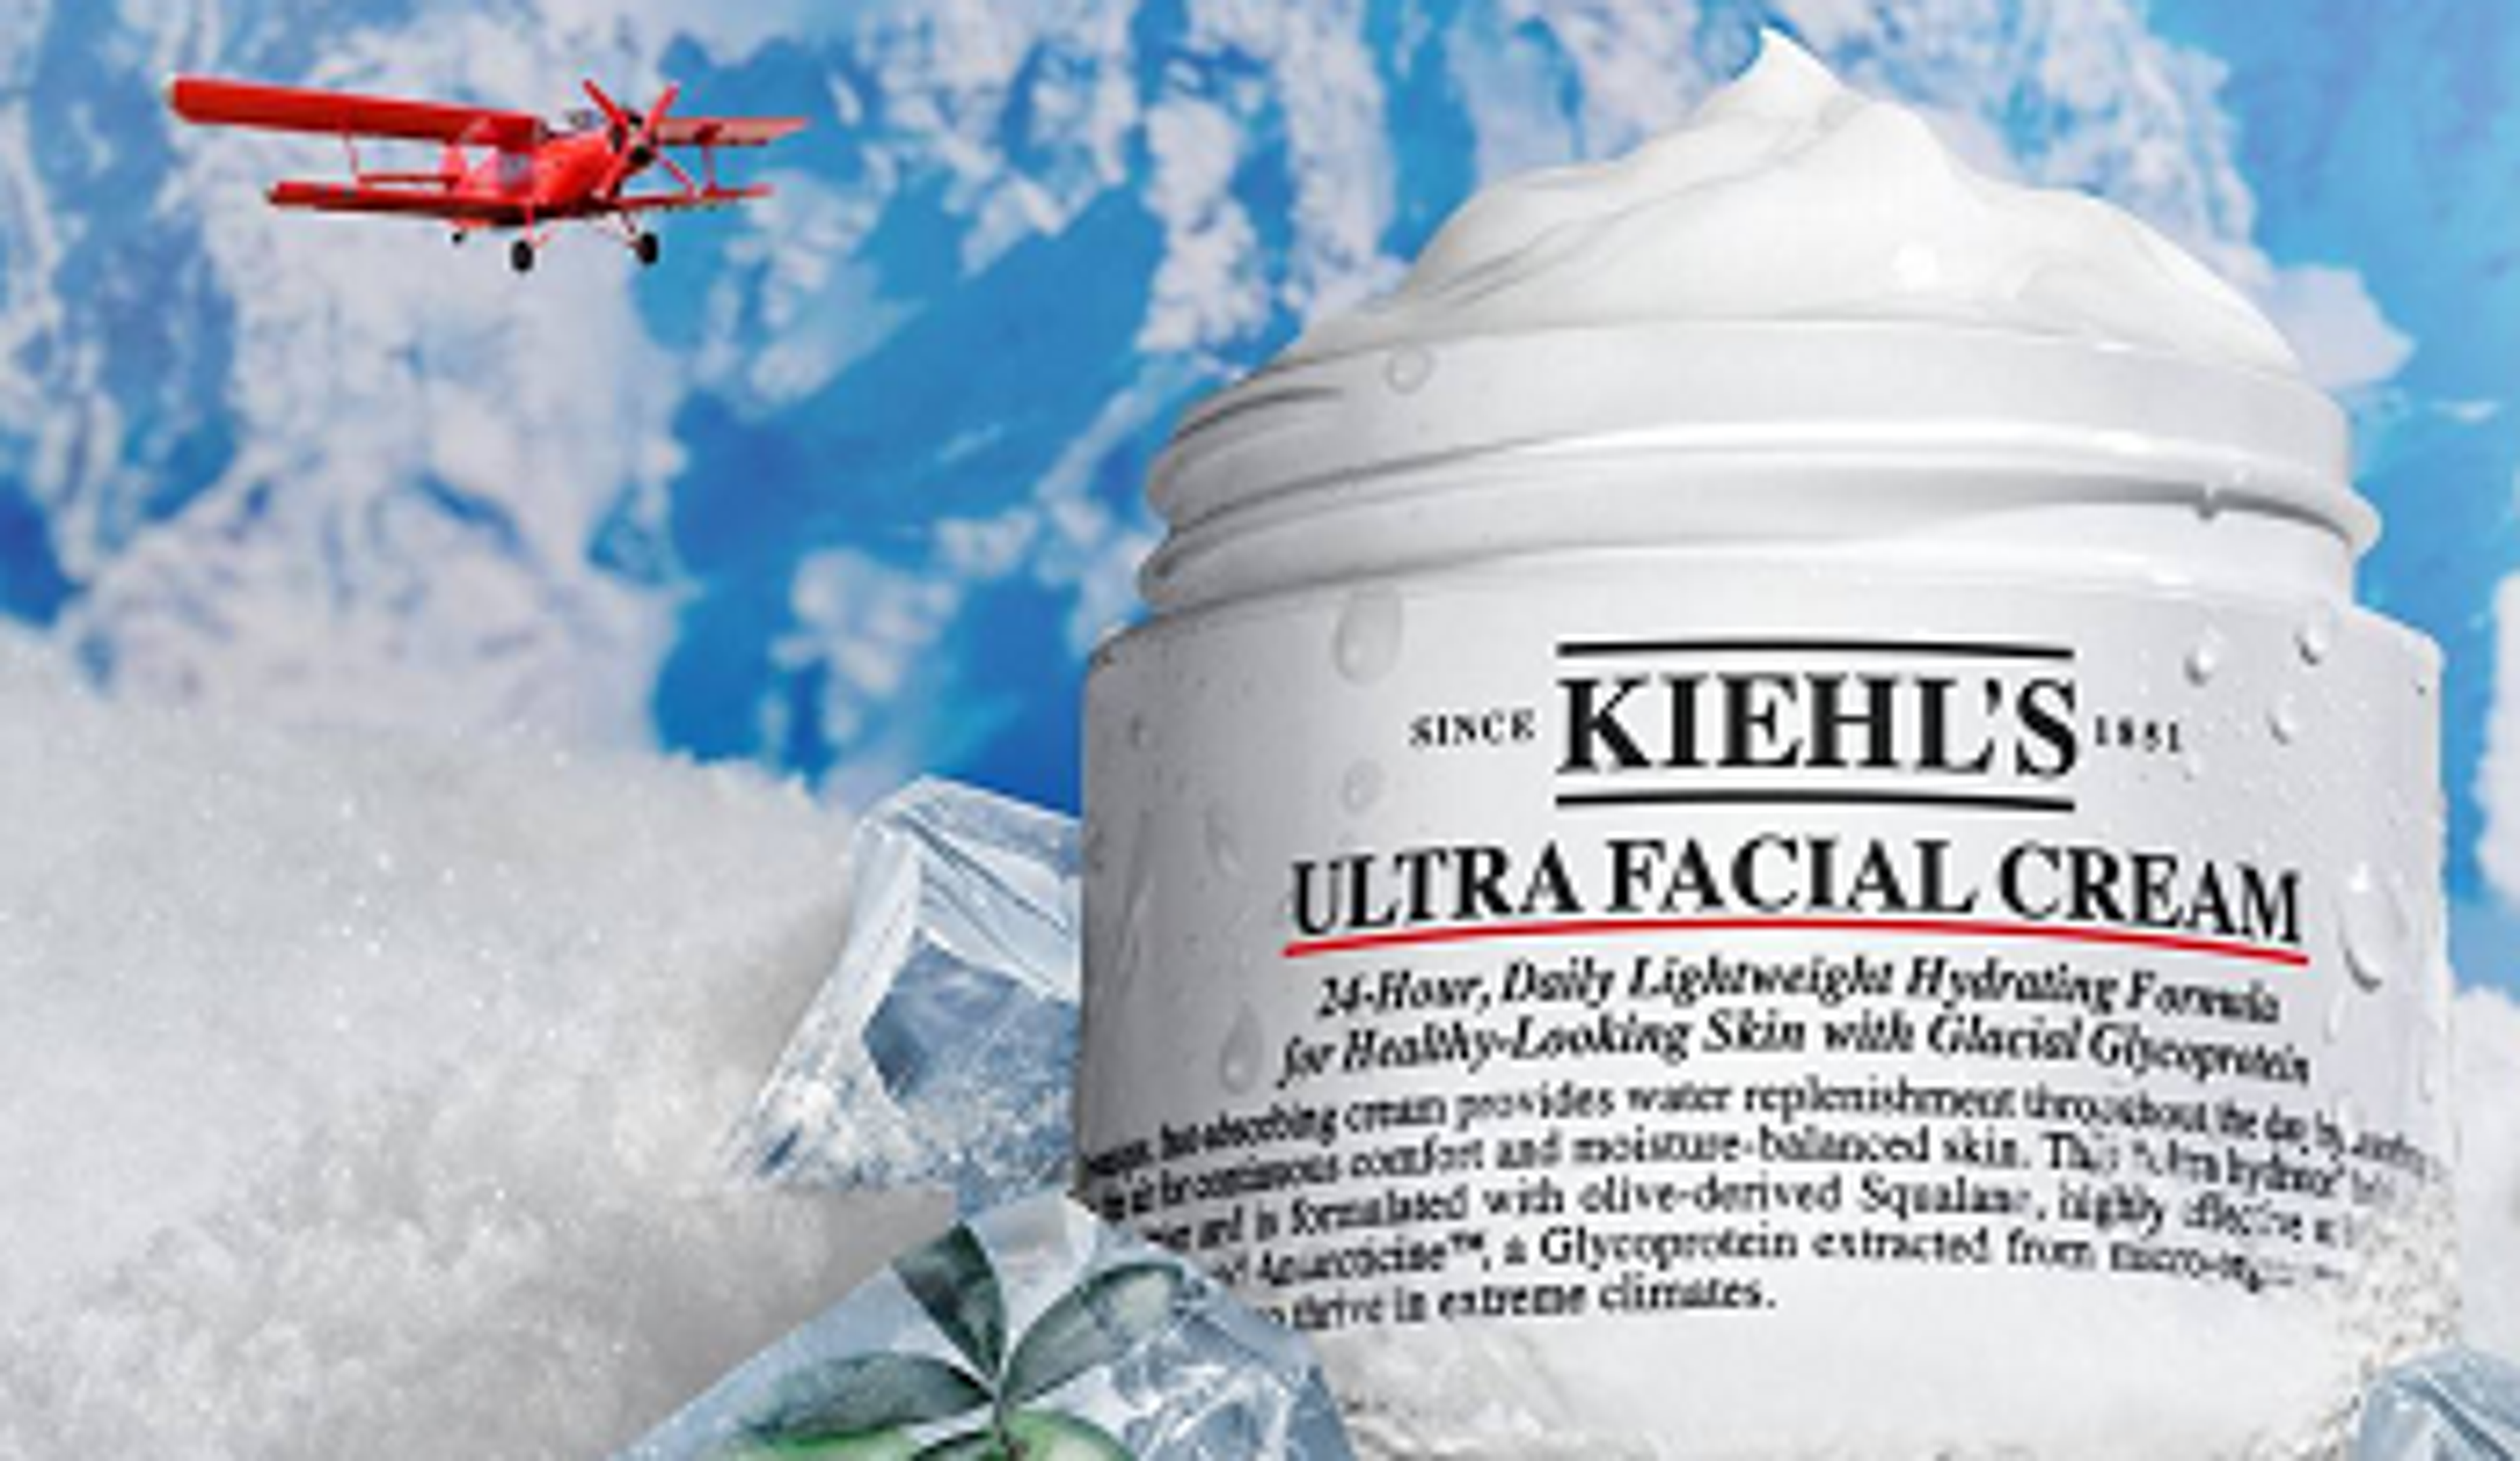  Kiehl's Ultra Facial Cream on ice with red plane and sky in background 